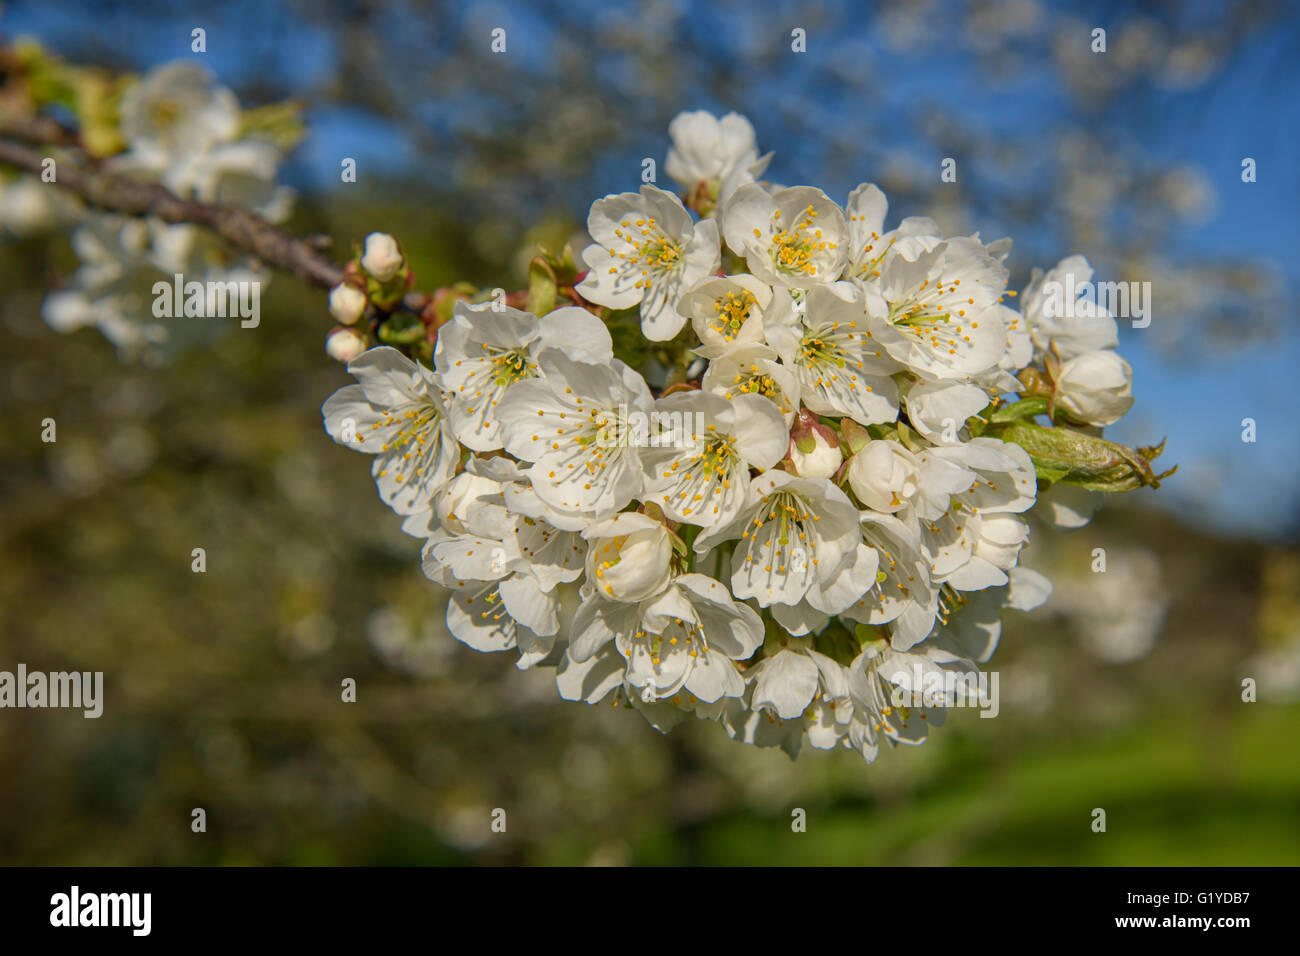 Flowering branch with cherry blossoms, detail, Biosphere Reserve Swabian Alb, Baden-Württemberg, Germany Stock Photo